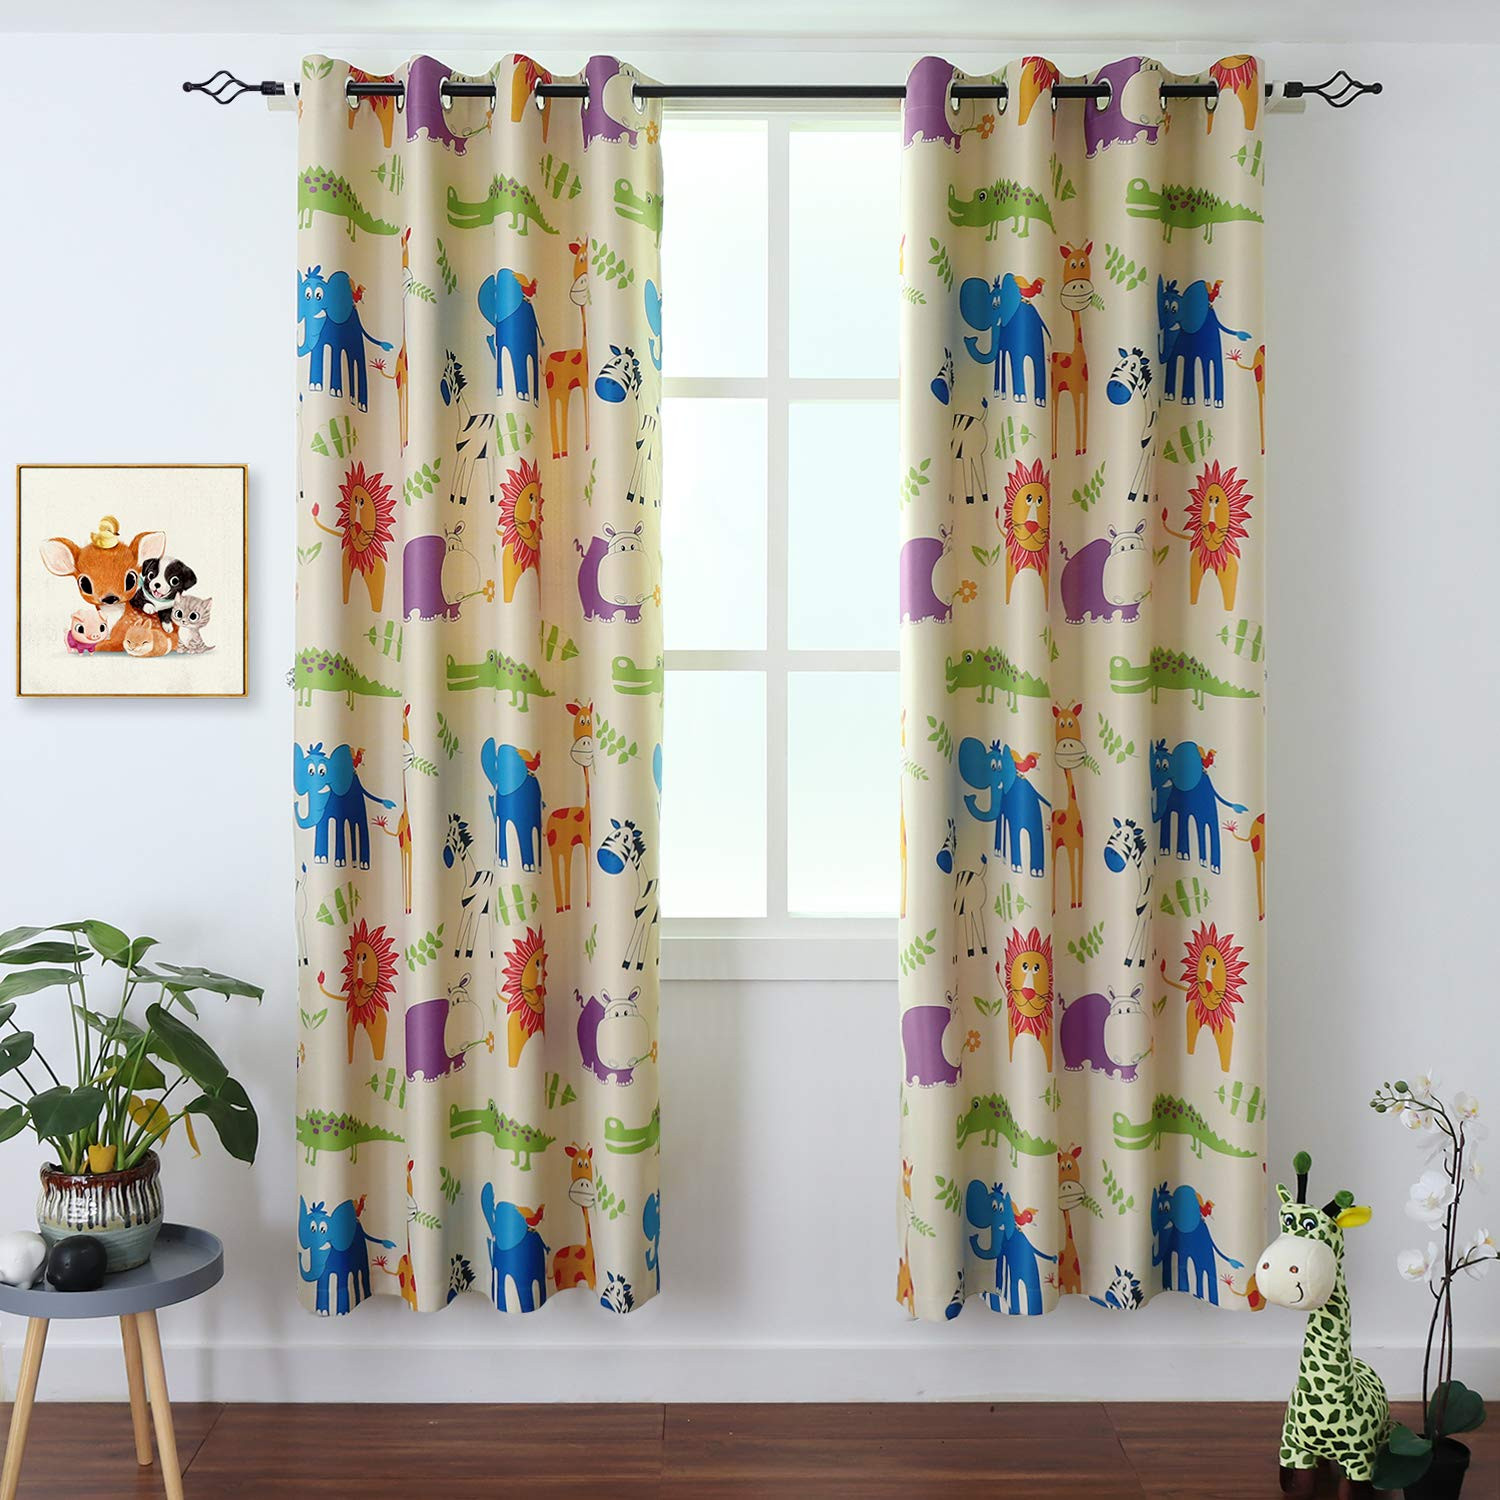 Kids Room Blackout Curtains
 Top 19 Best Blackout Curtains For Nursery Children For